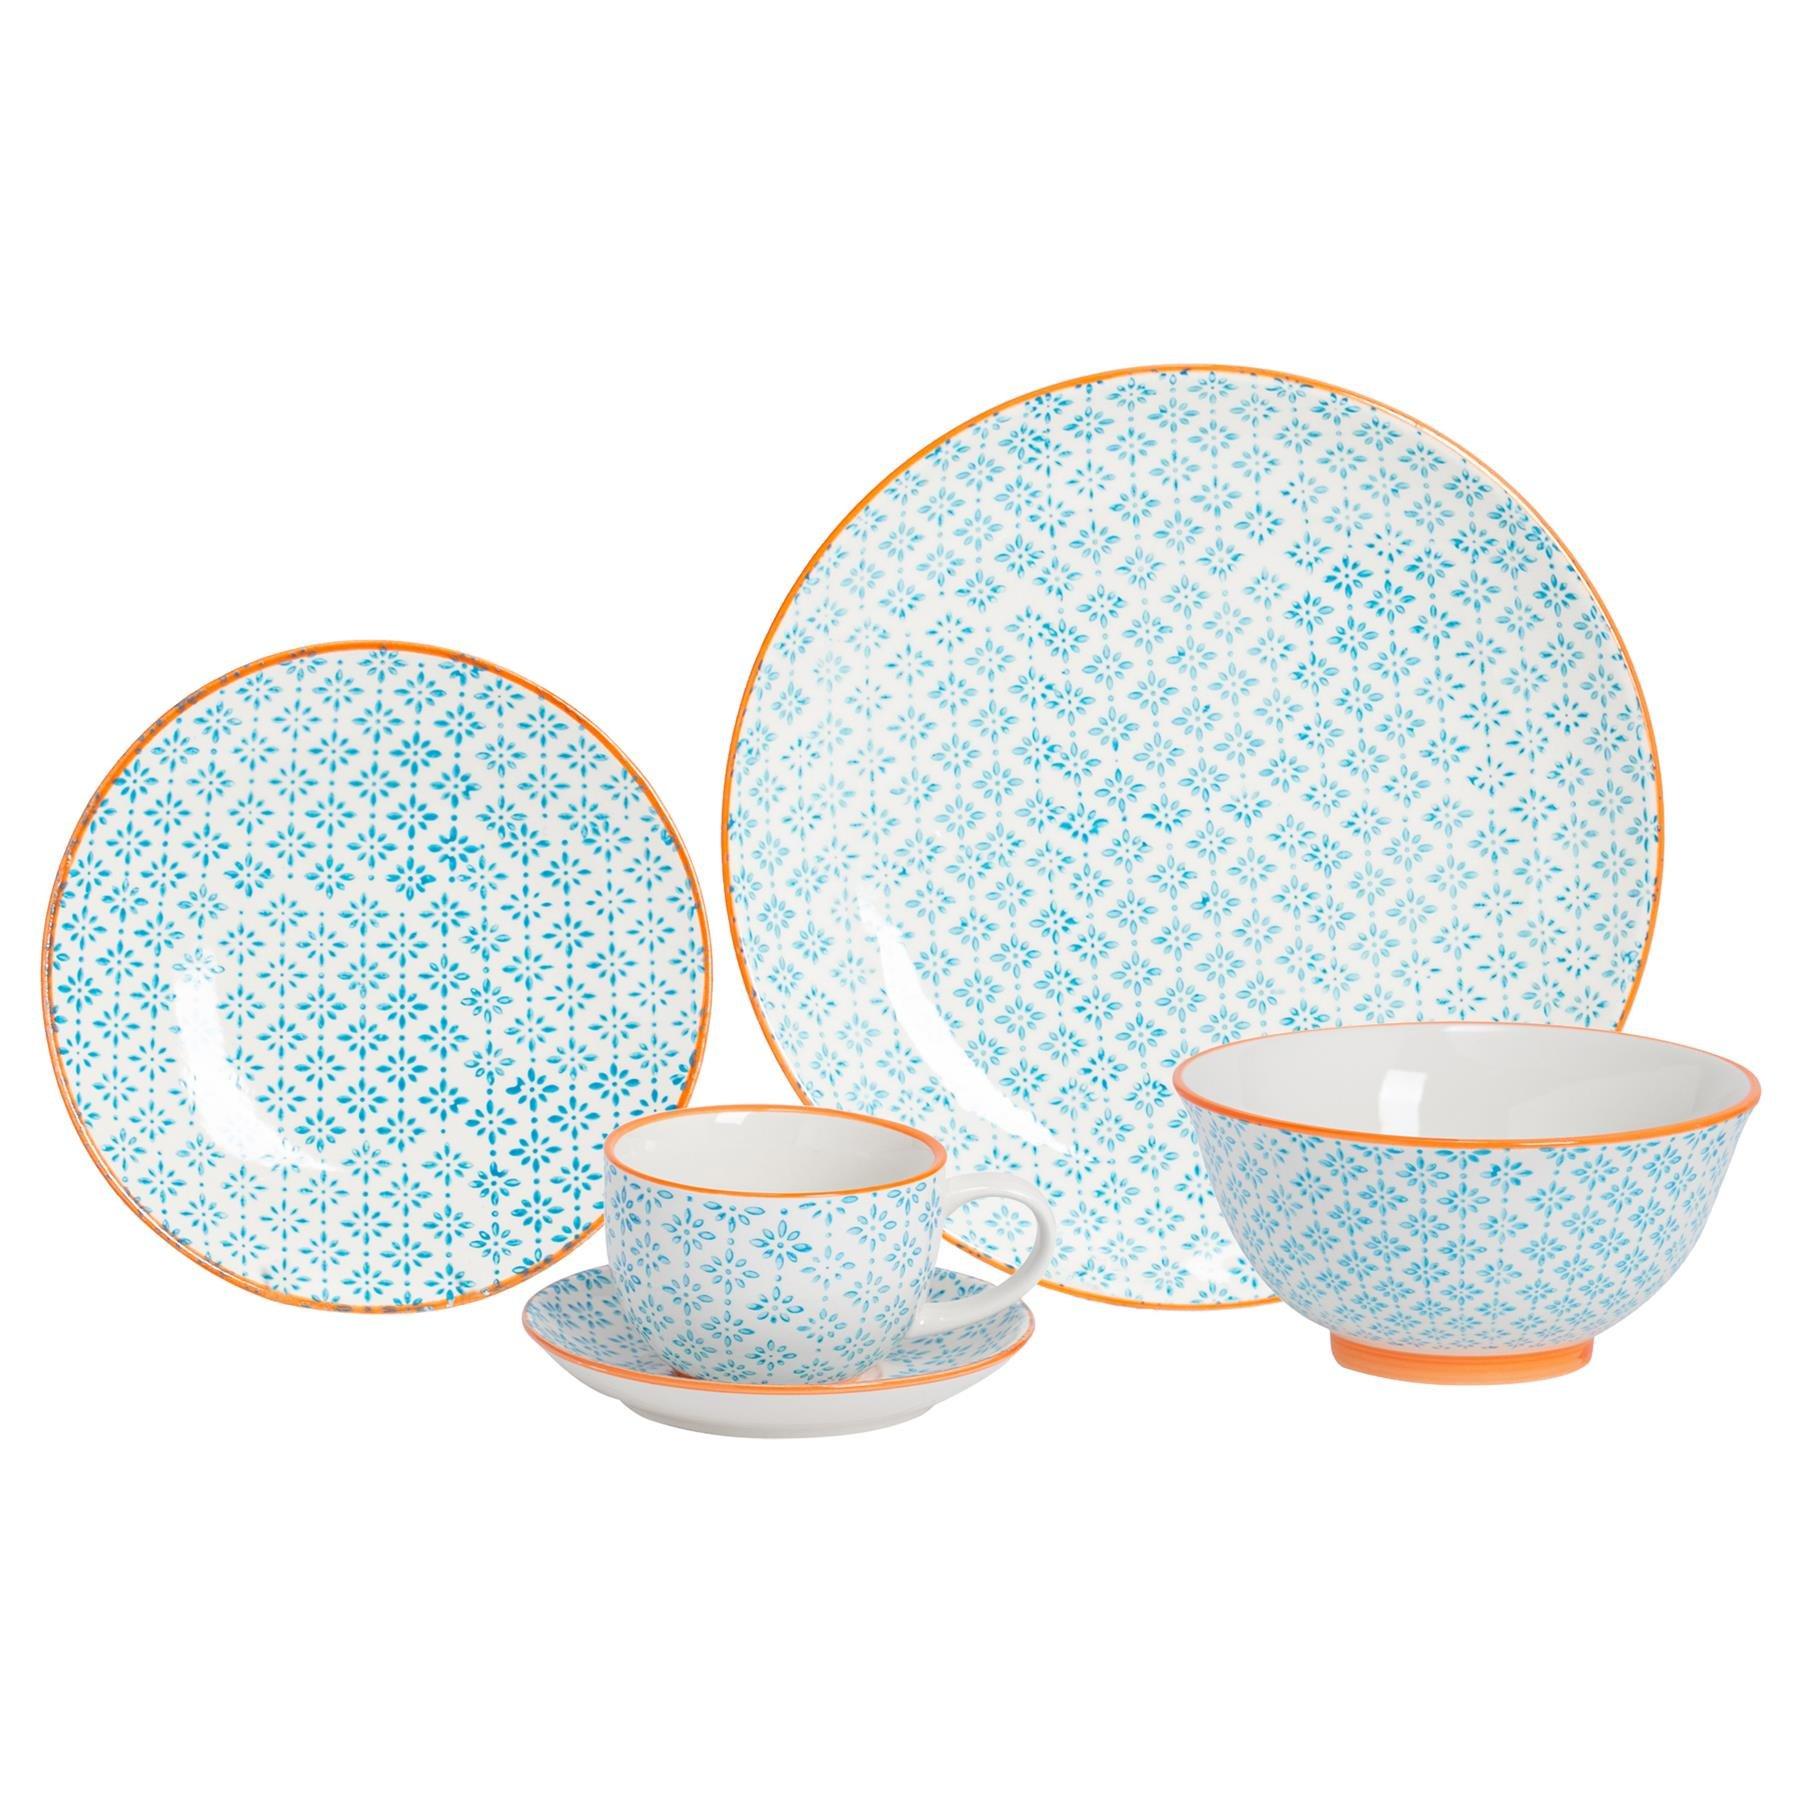 30 Piece Hand-Printed Dinner Set - Pack of 1